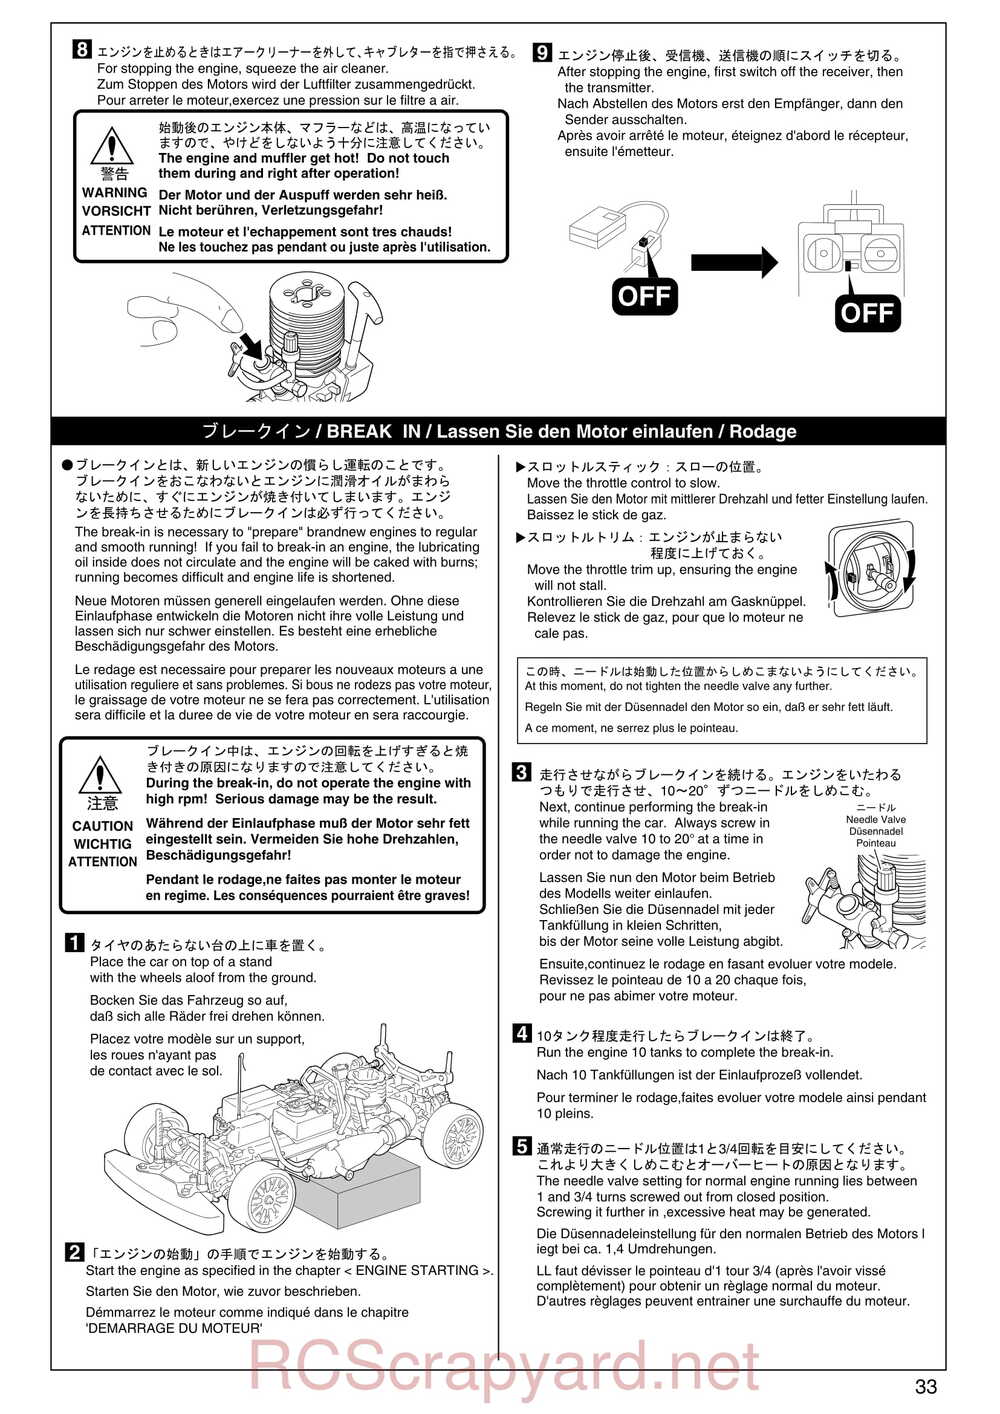 Kyosho - 31122 - V-One S2 - Manual - Page 33